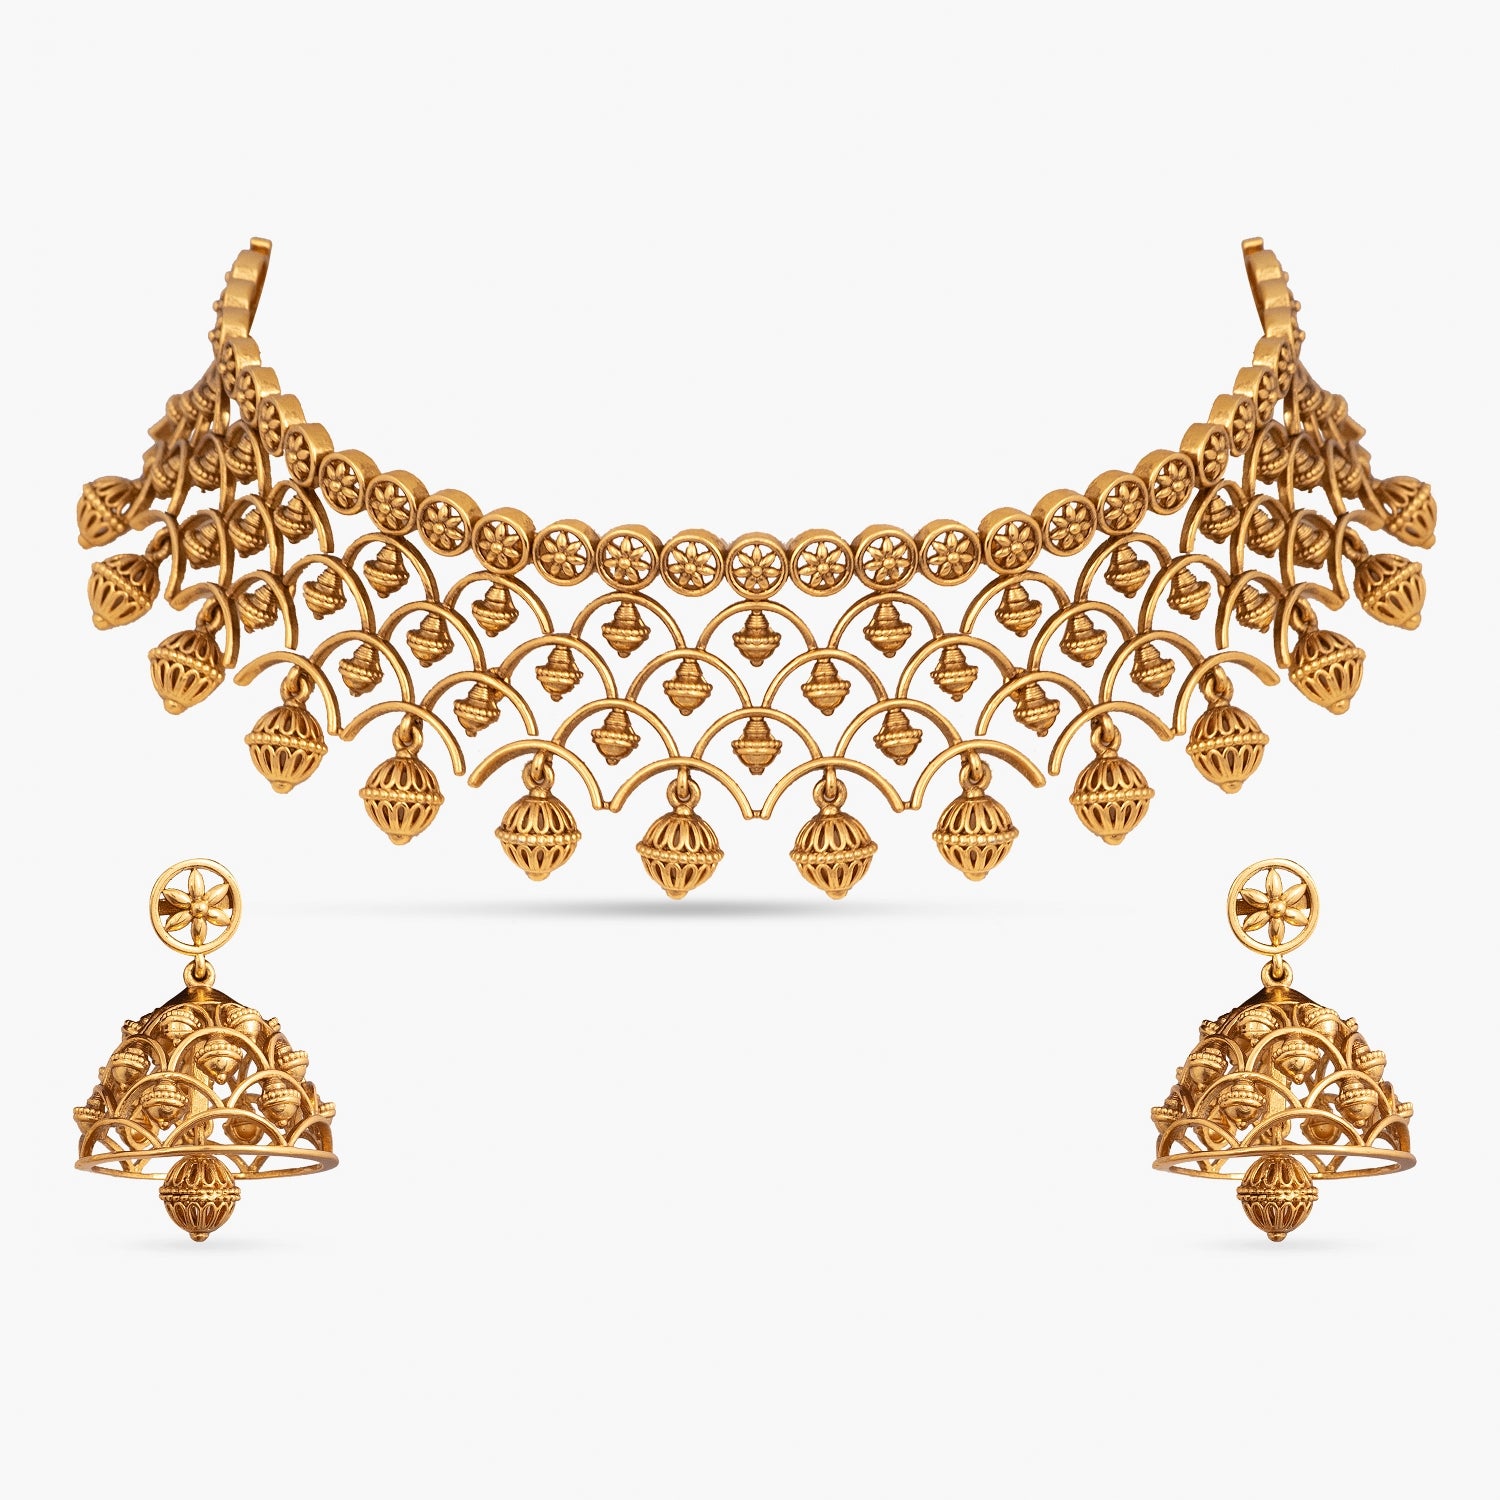 Share more than 73 ethnic earrings on myntra